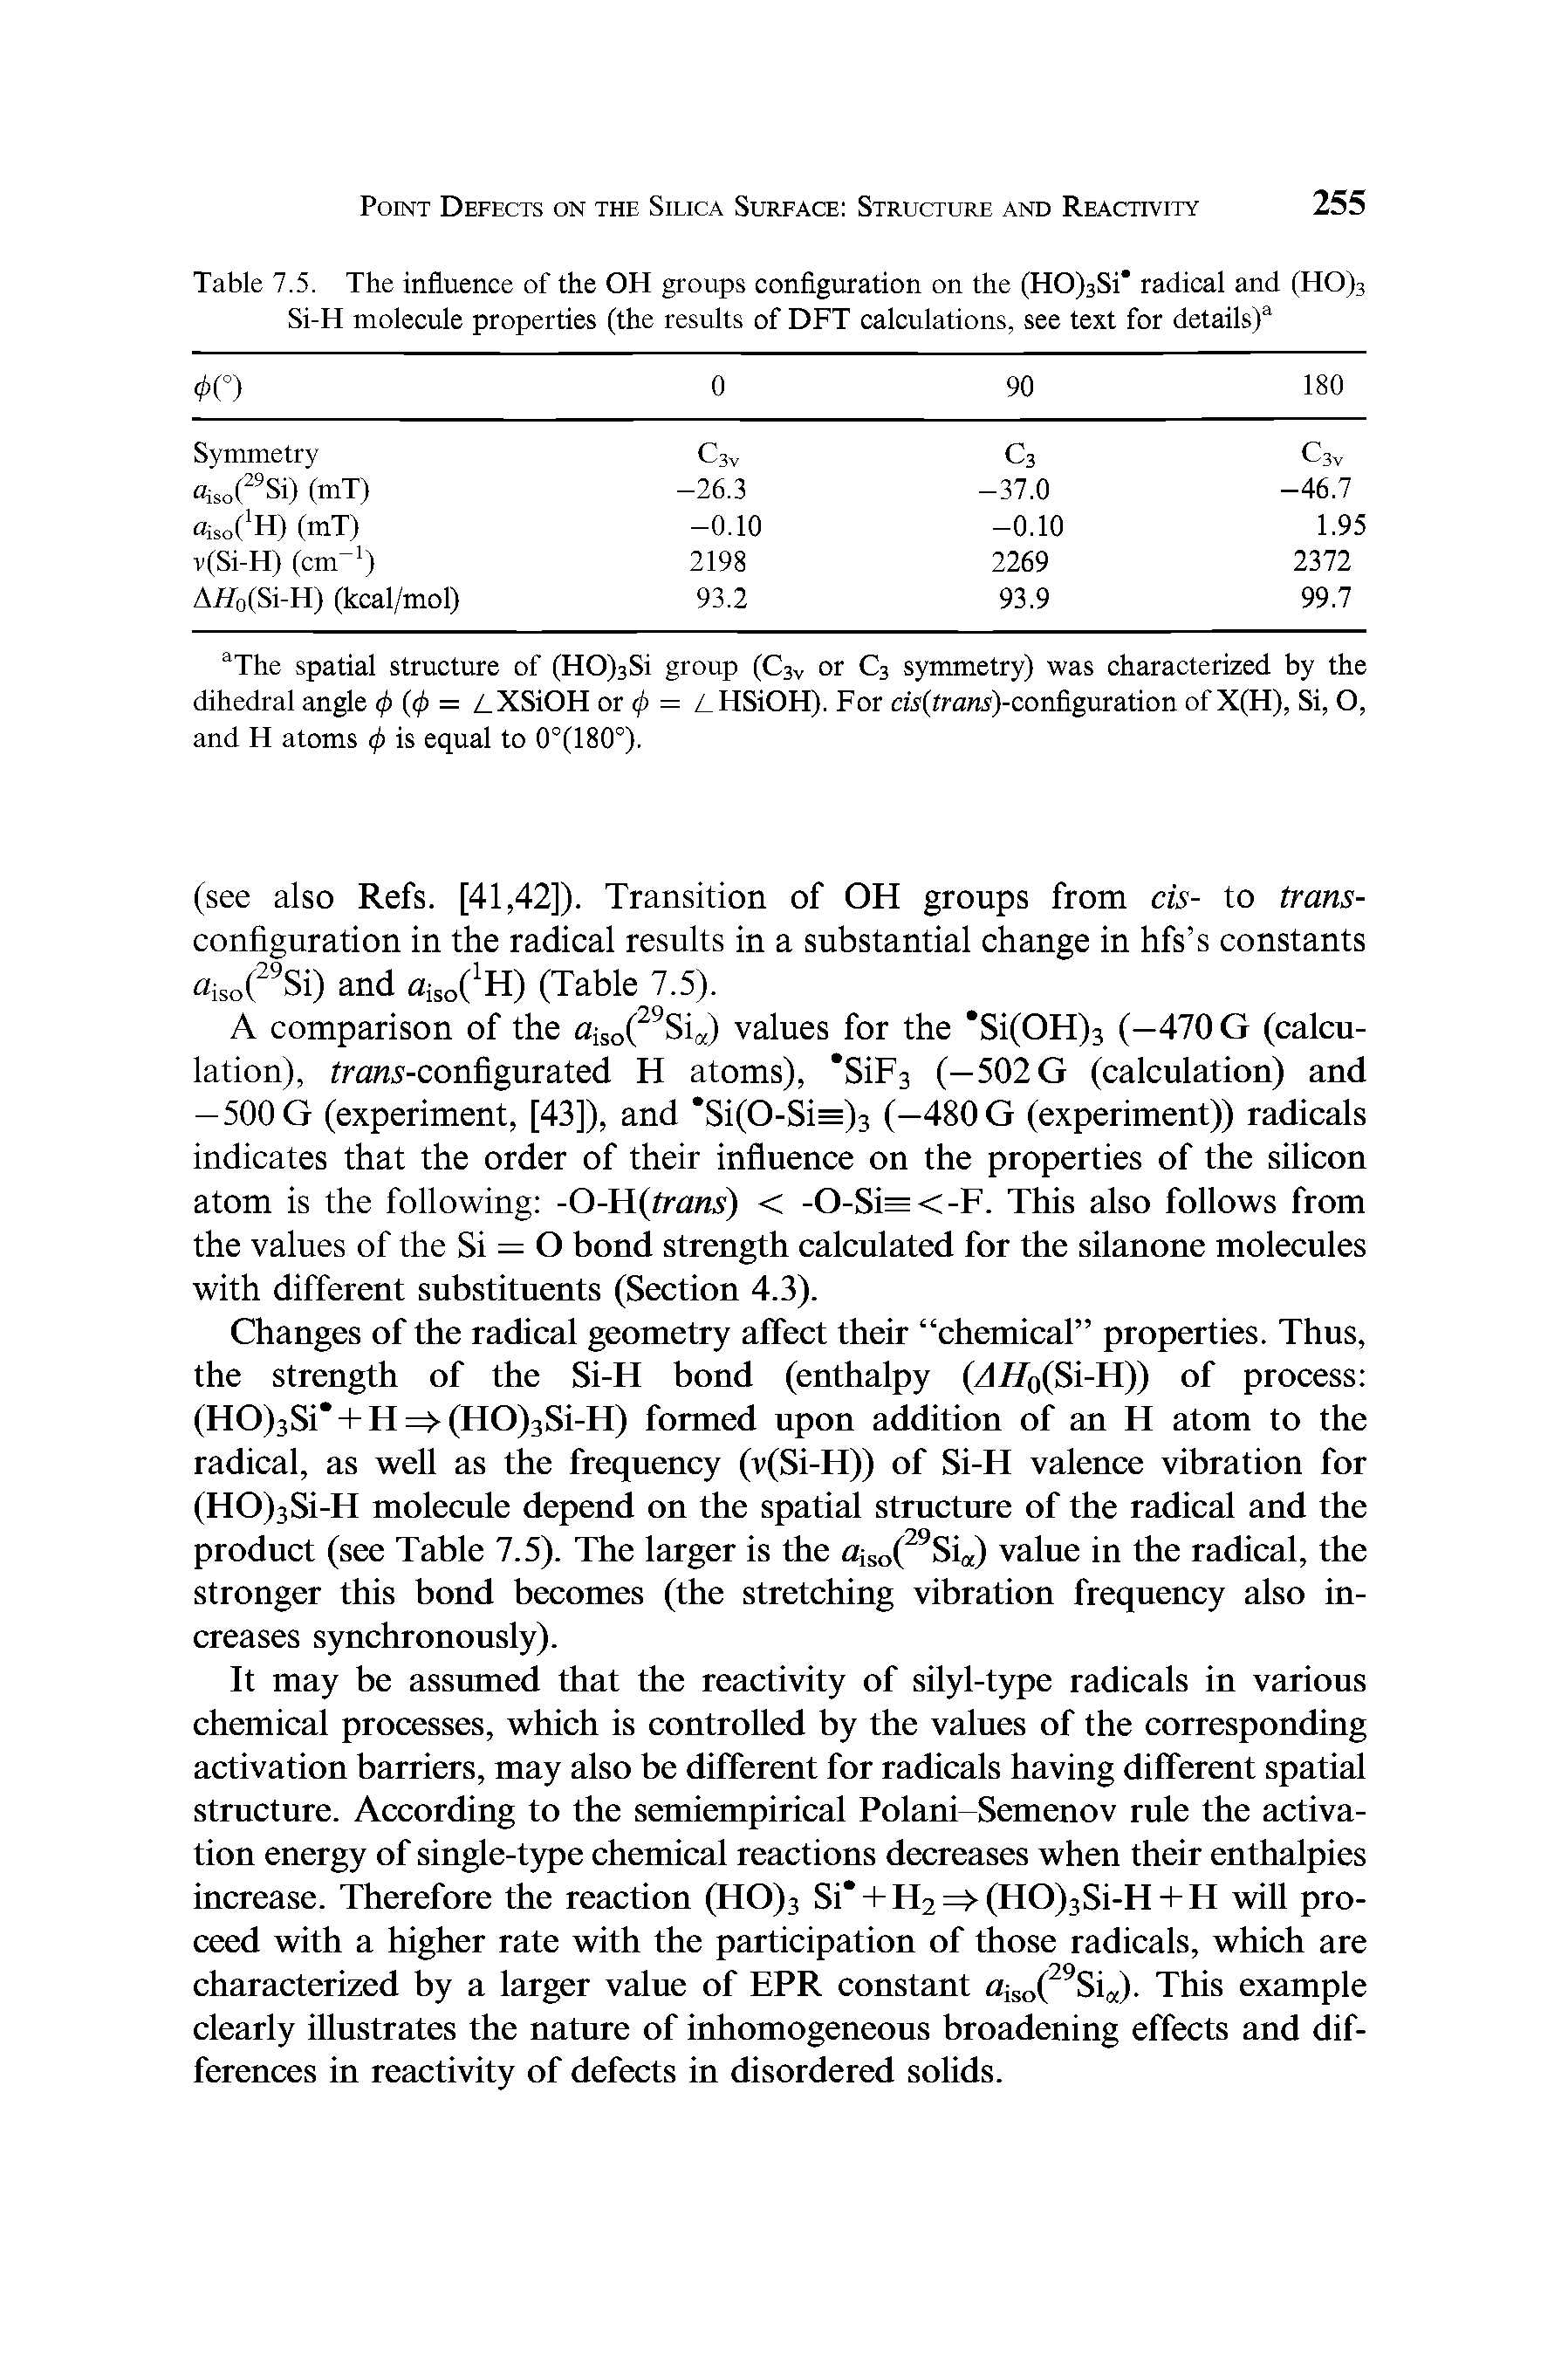 Table 7.5. The influence of the OH groups configuration on the (HO)3Si radical and (HO)3 Si-H molecule properties (the results of DFT calculations, see text for details)3...